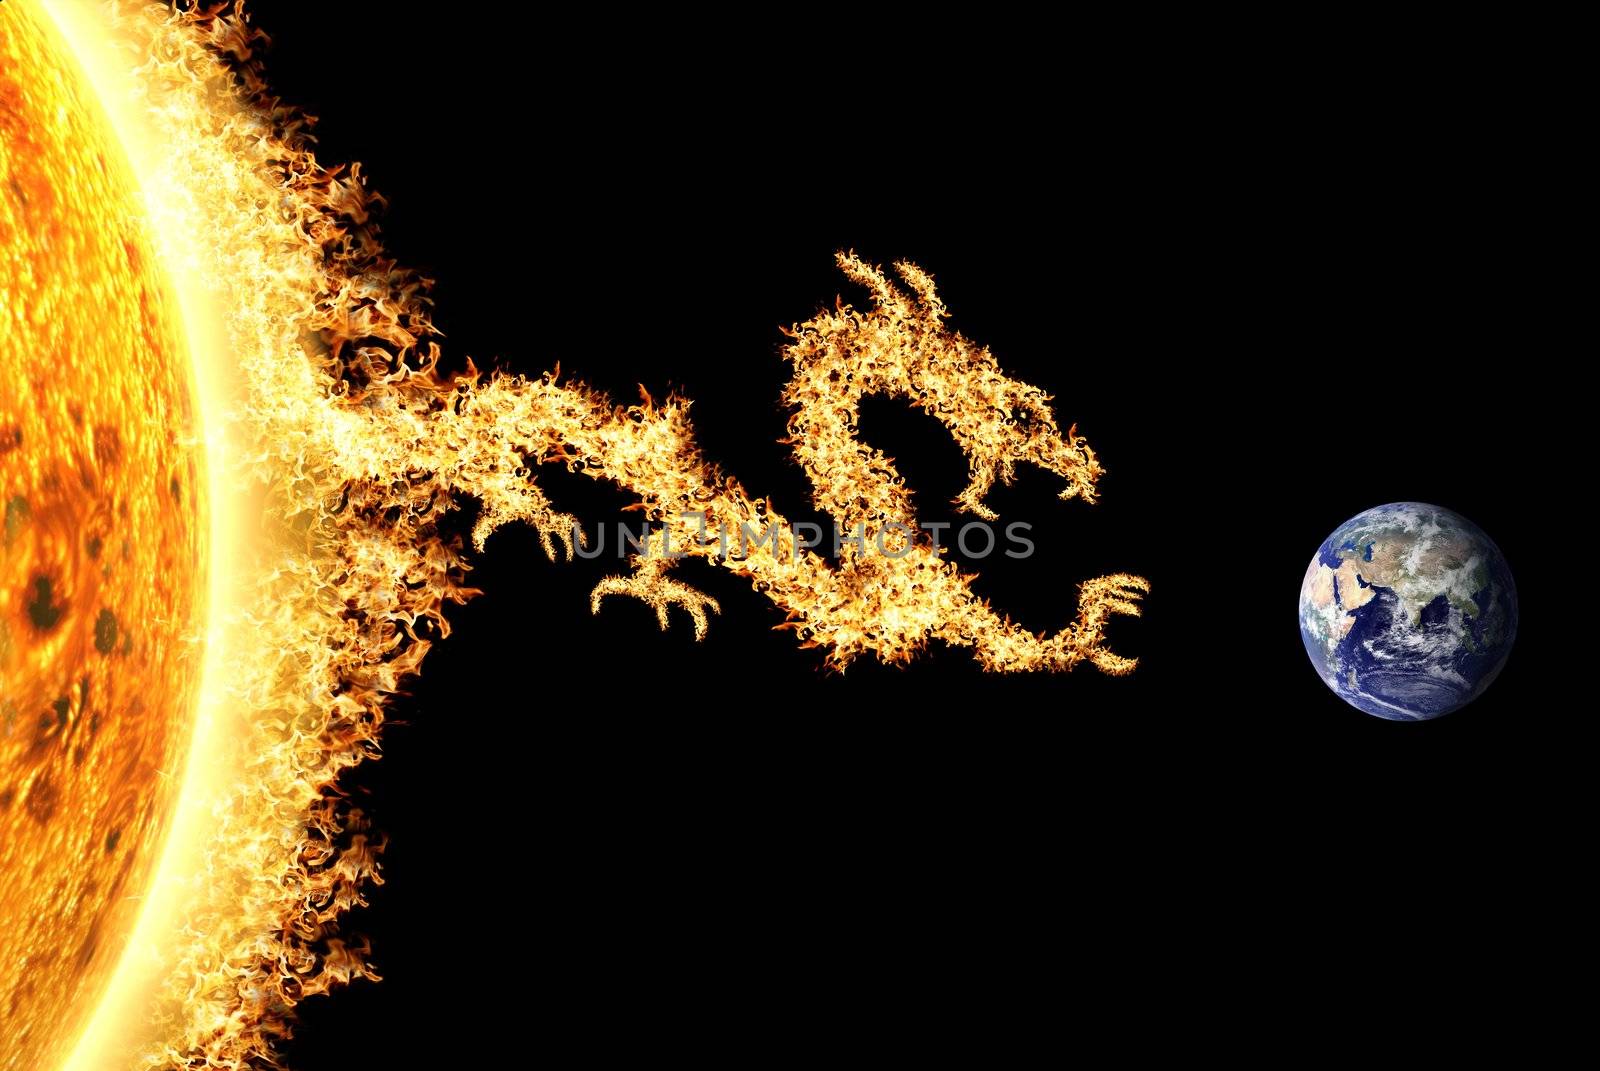 Fire dragon from the Sun heading towards Earth by sasilsolutions